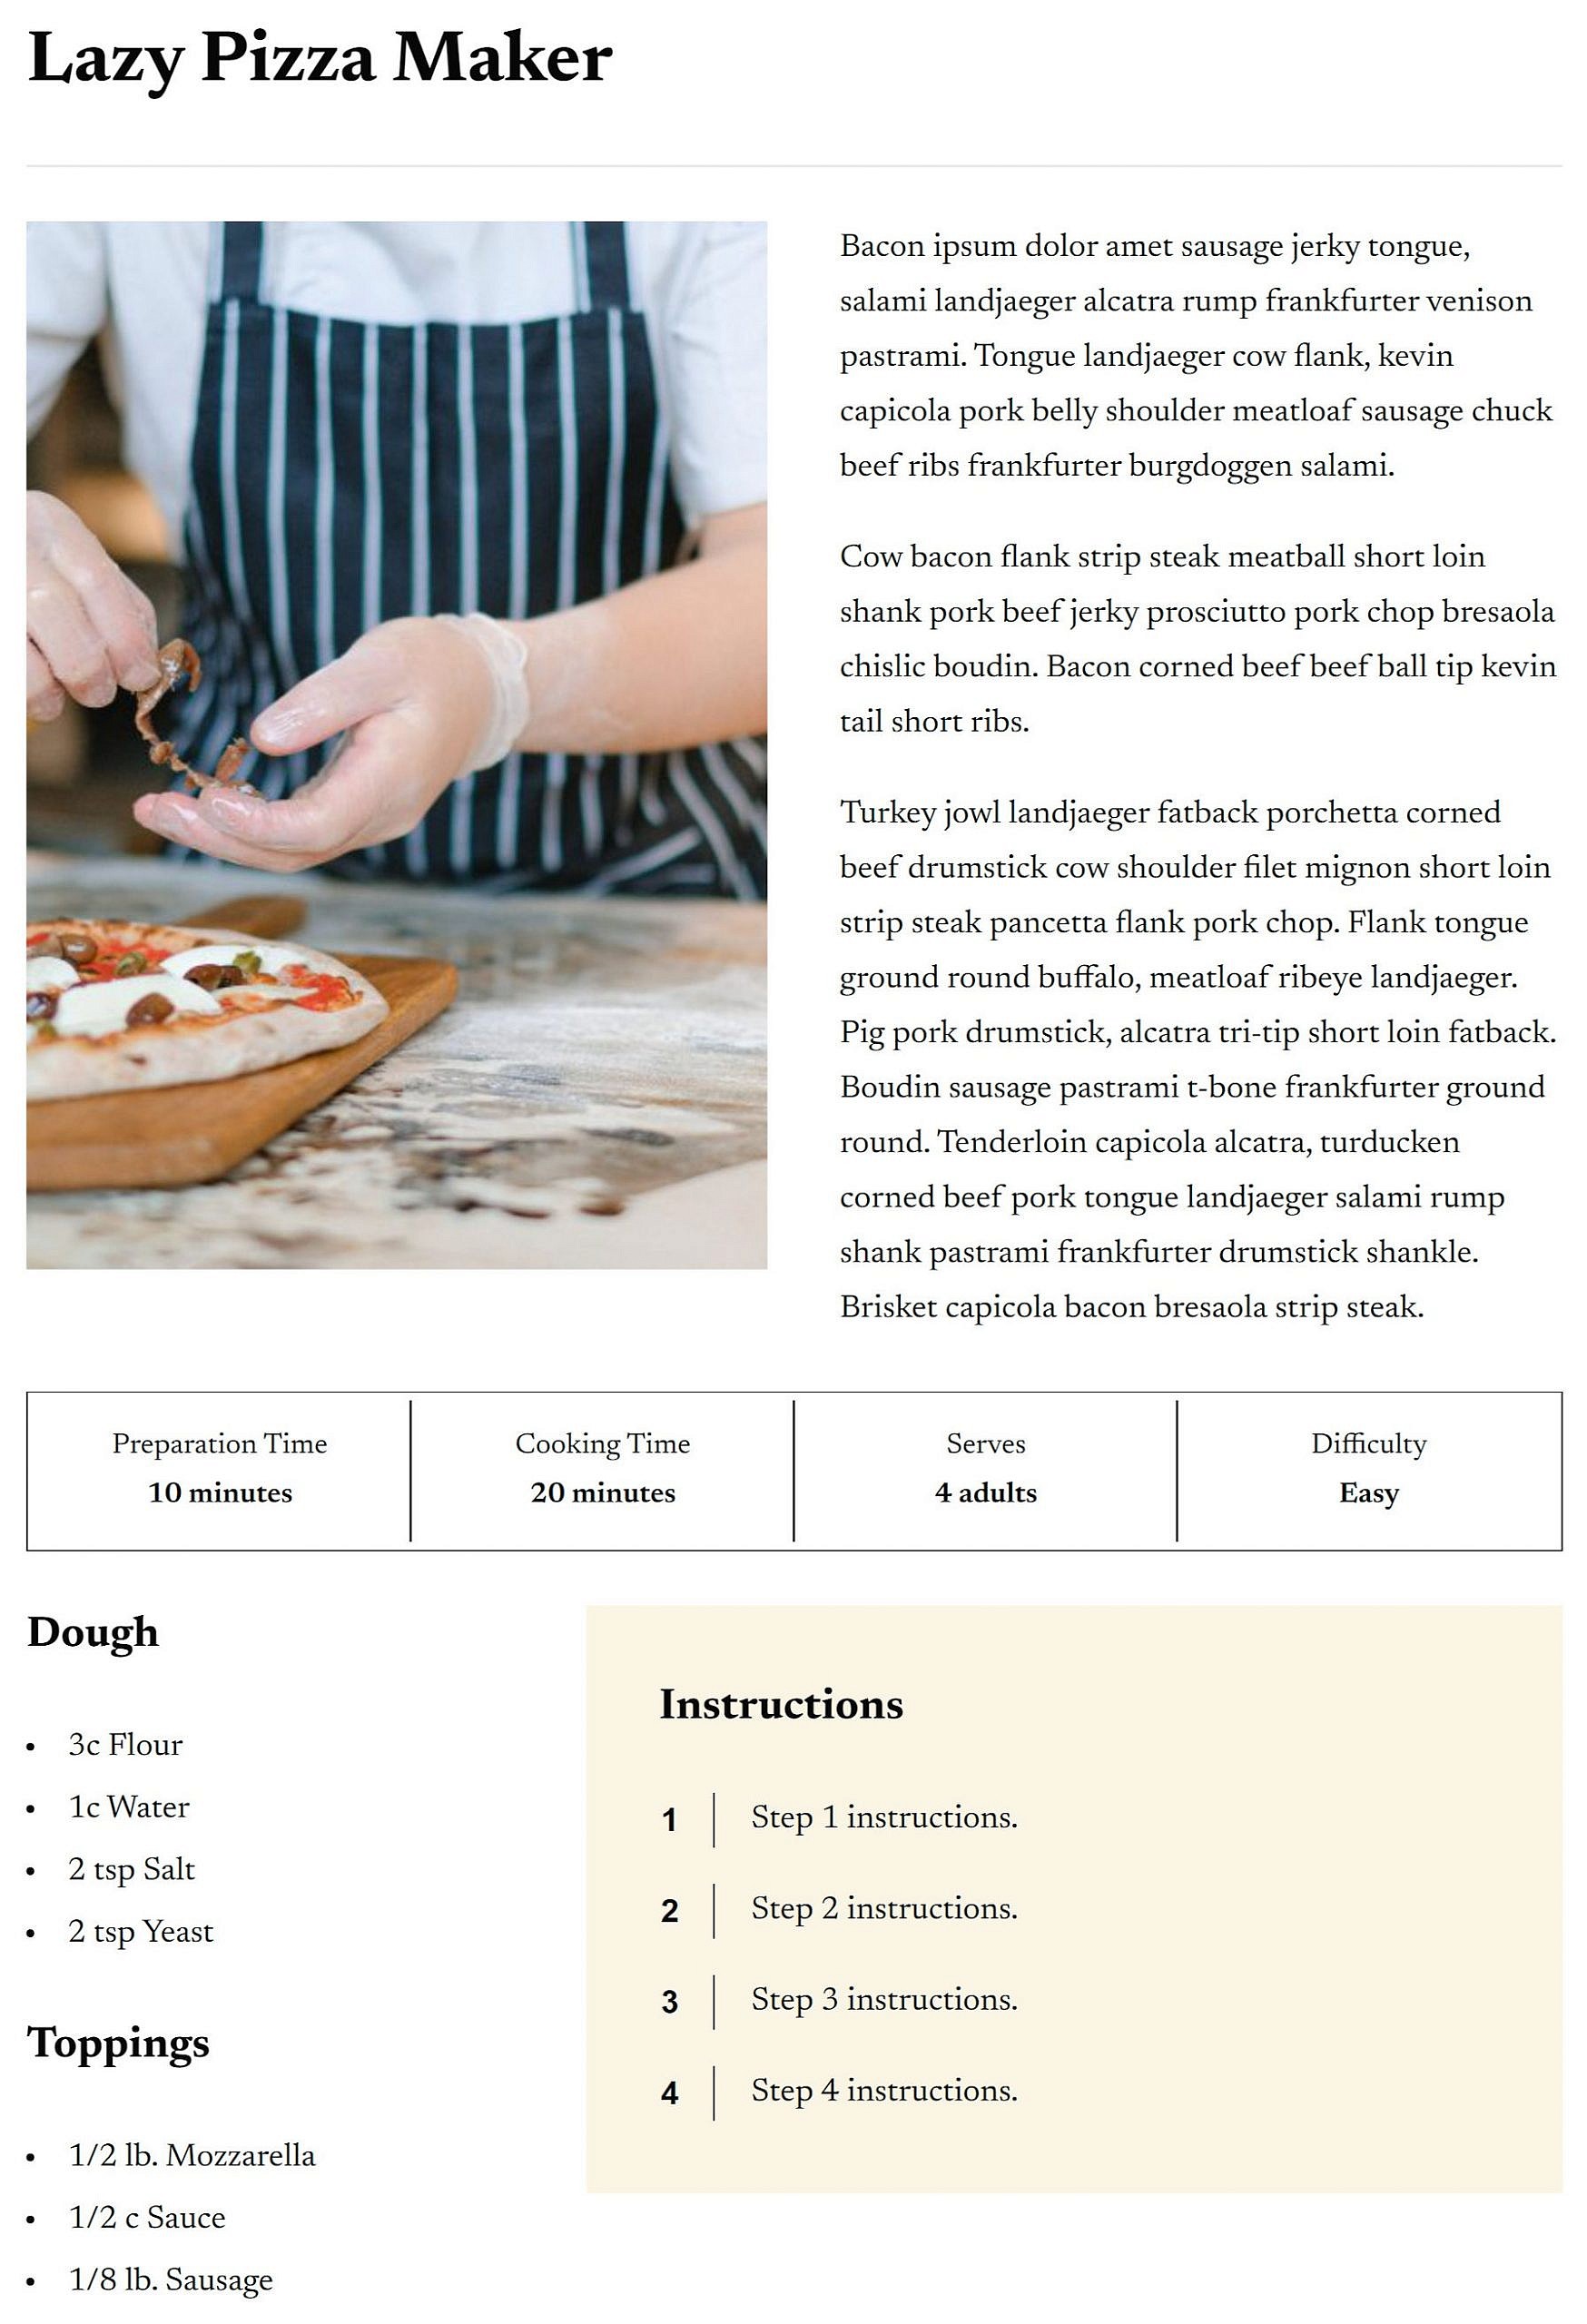 Recipe blog post screenshot with info, ingredients, and instructions.